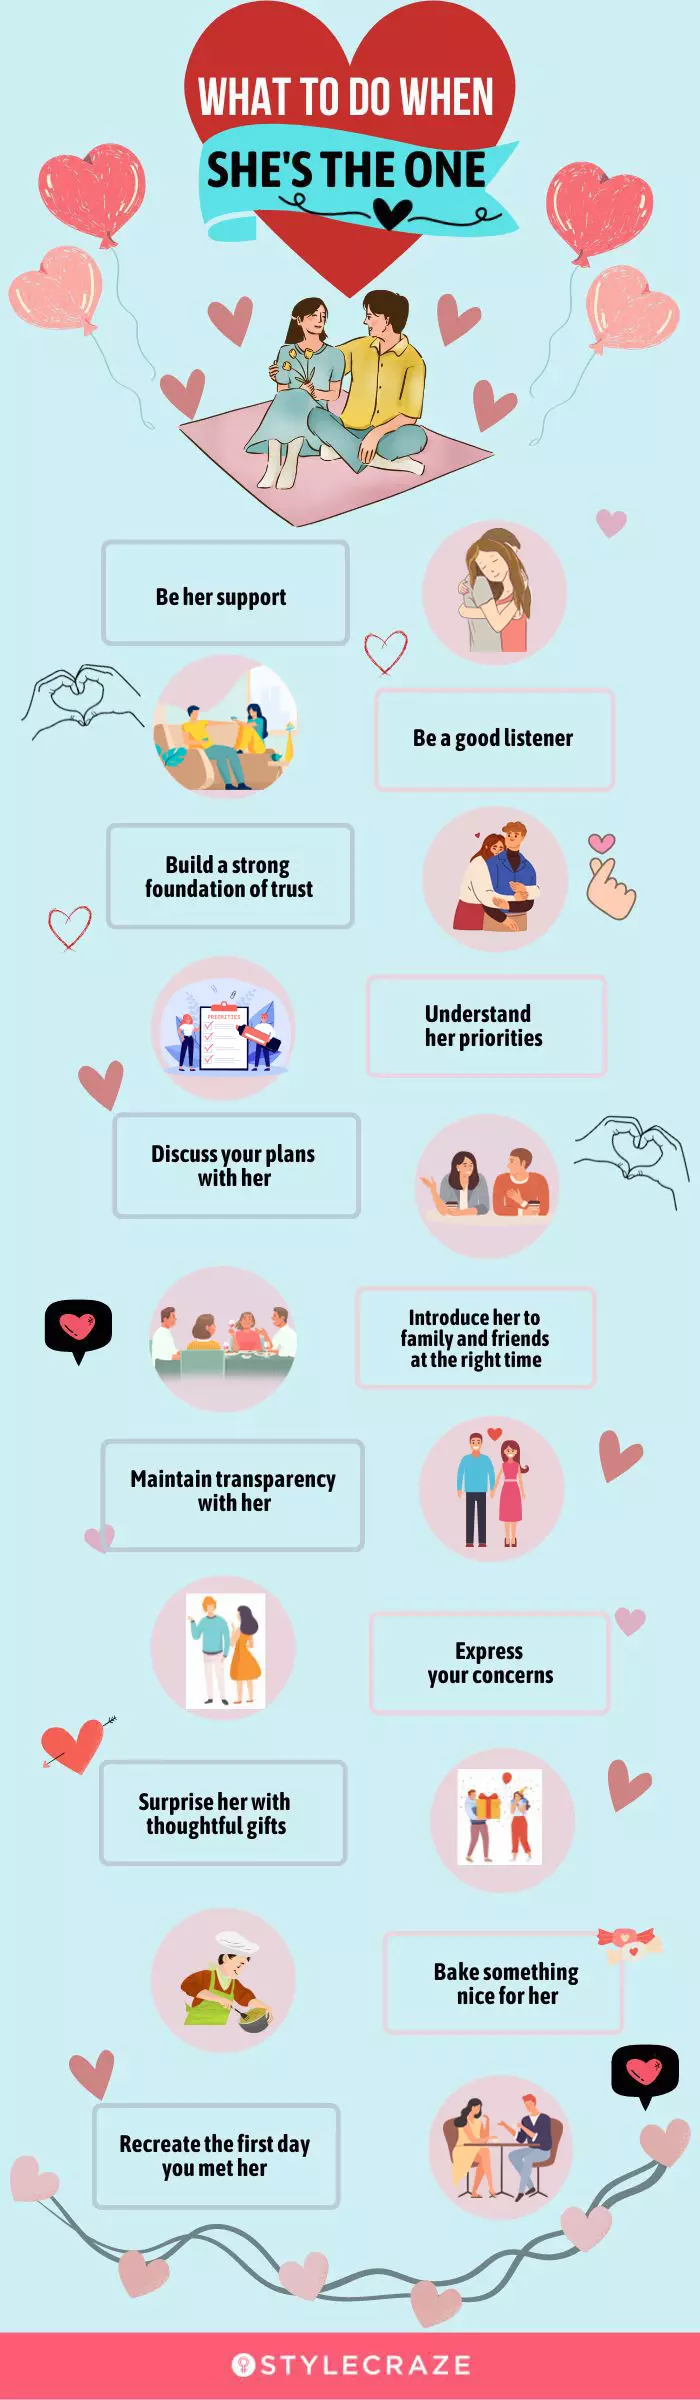 what to do when she's the one (infographic)